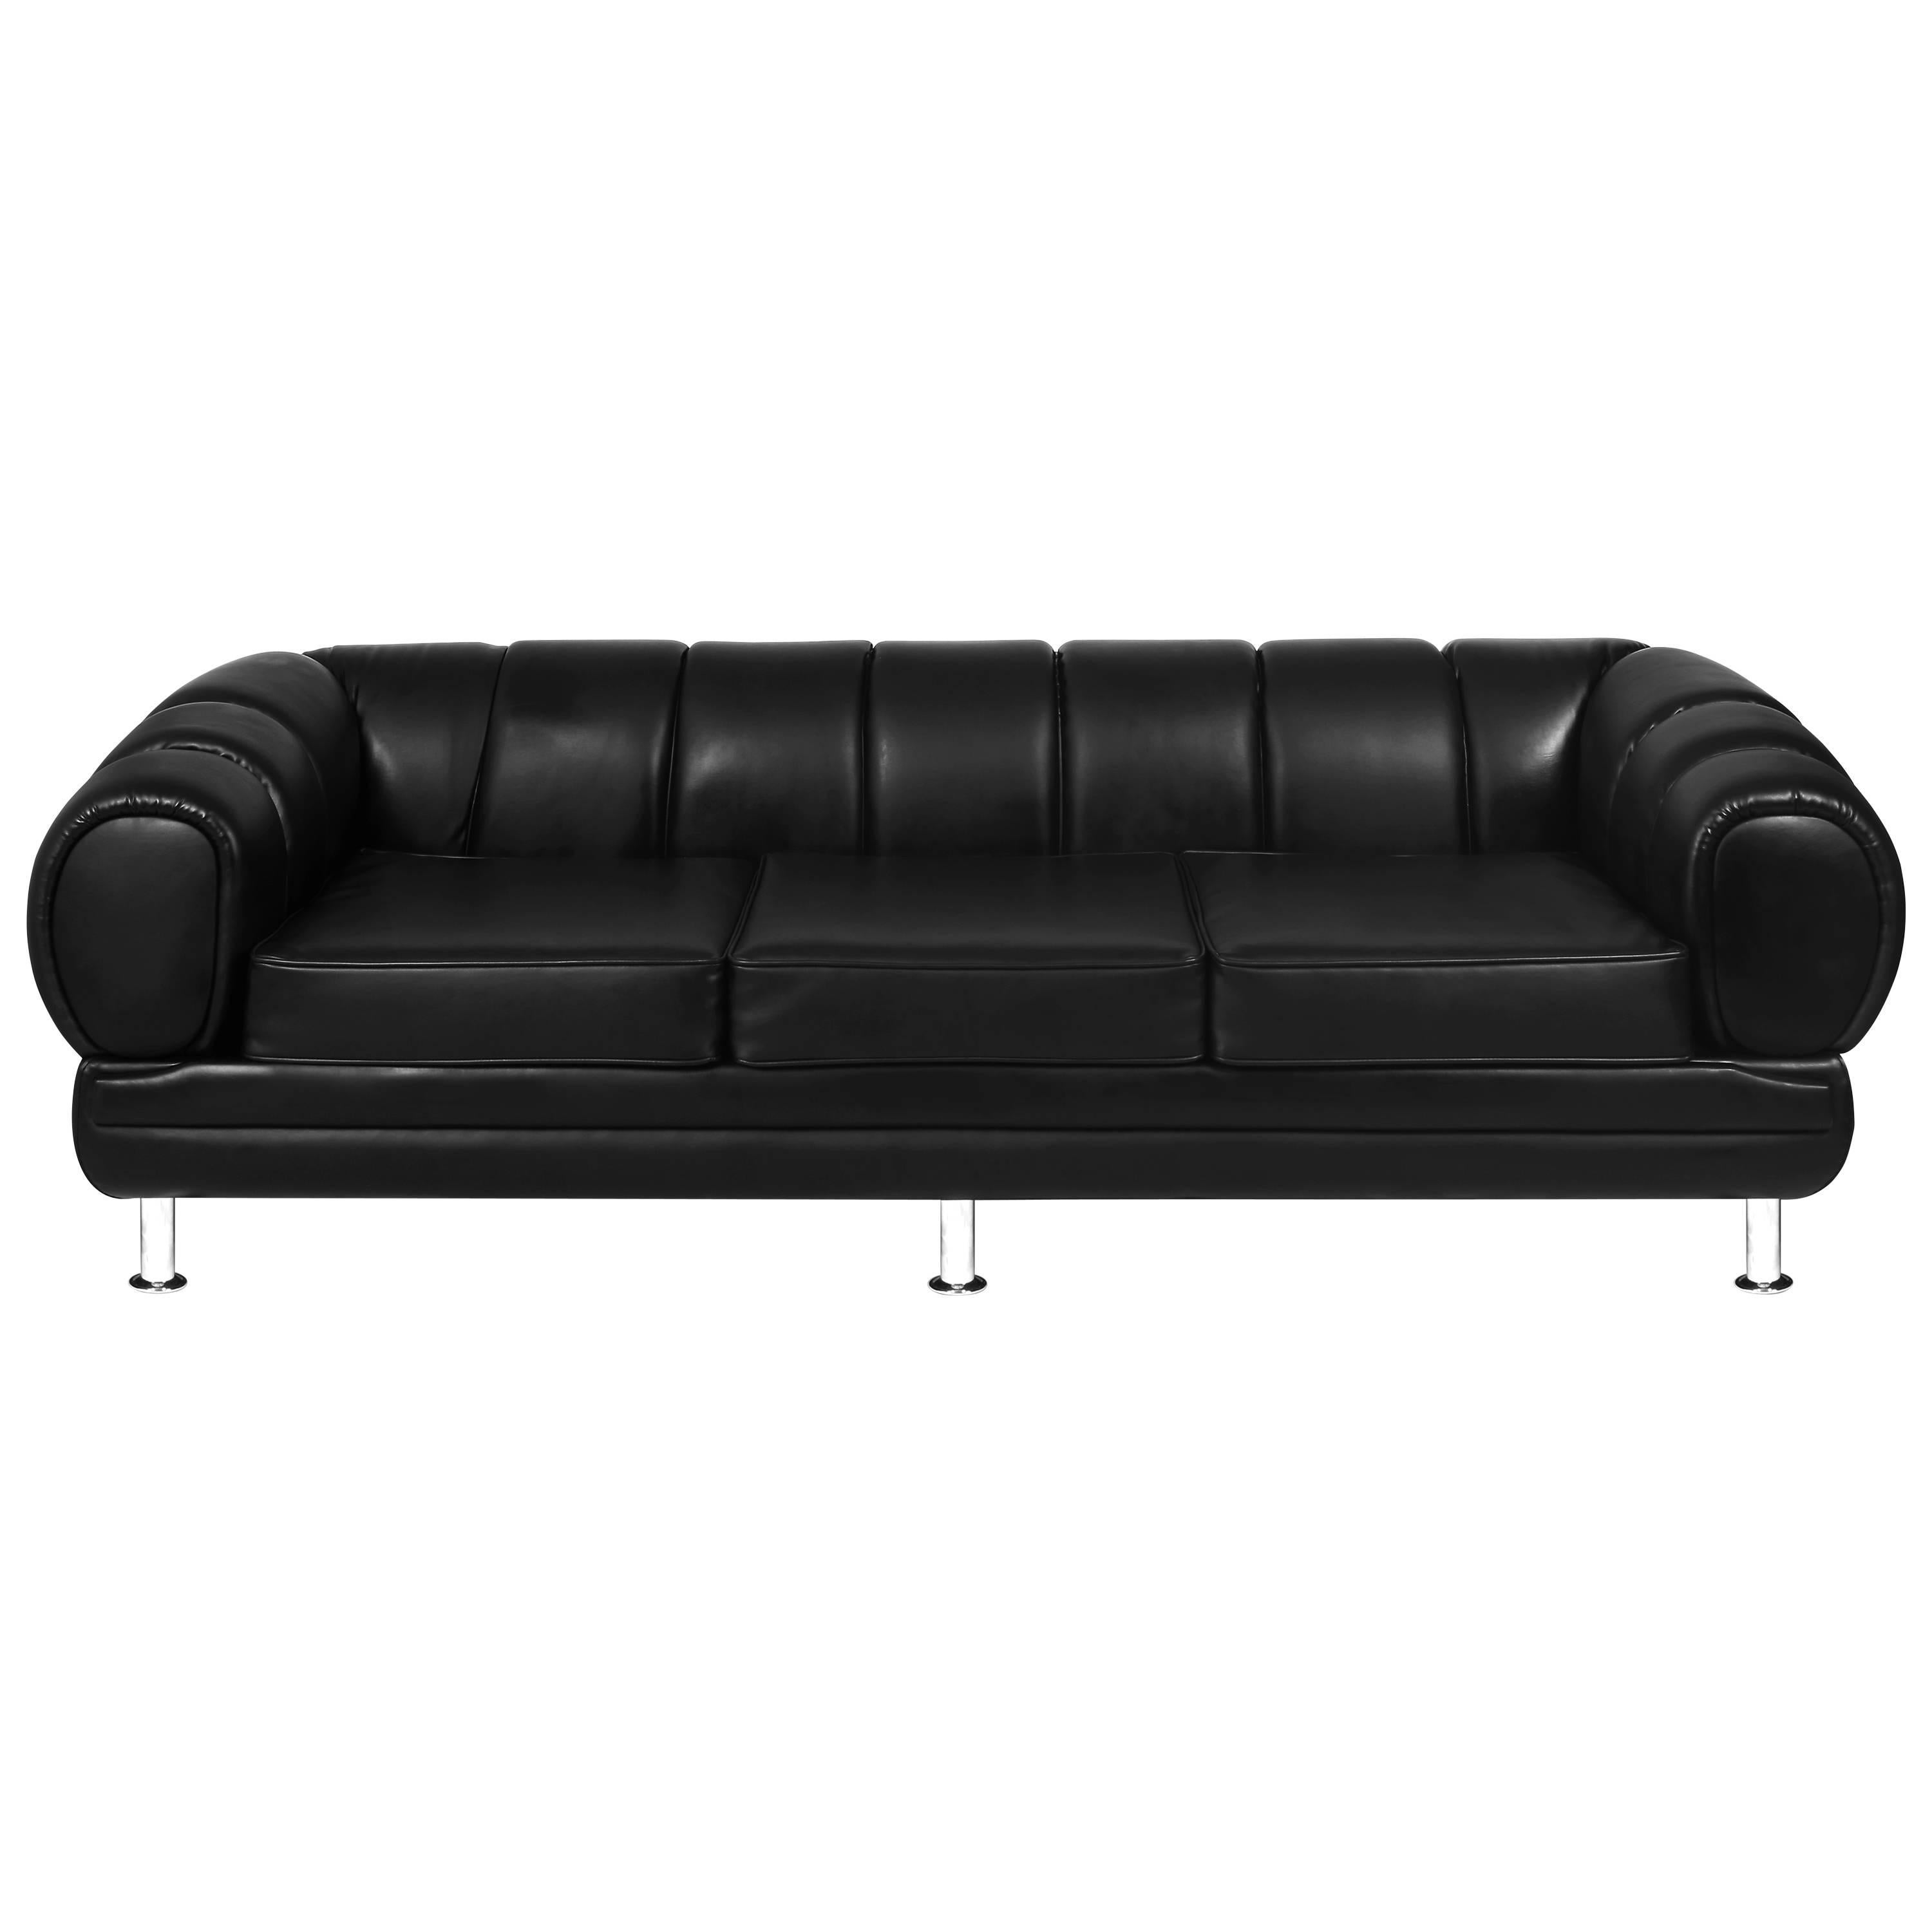 Mid-Century Modern Style Ruched Leather and Nickel Three-Seat Novac Sofa For Sale